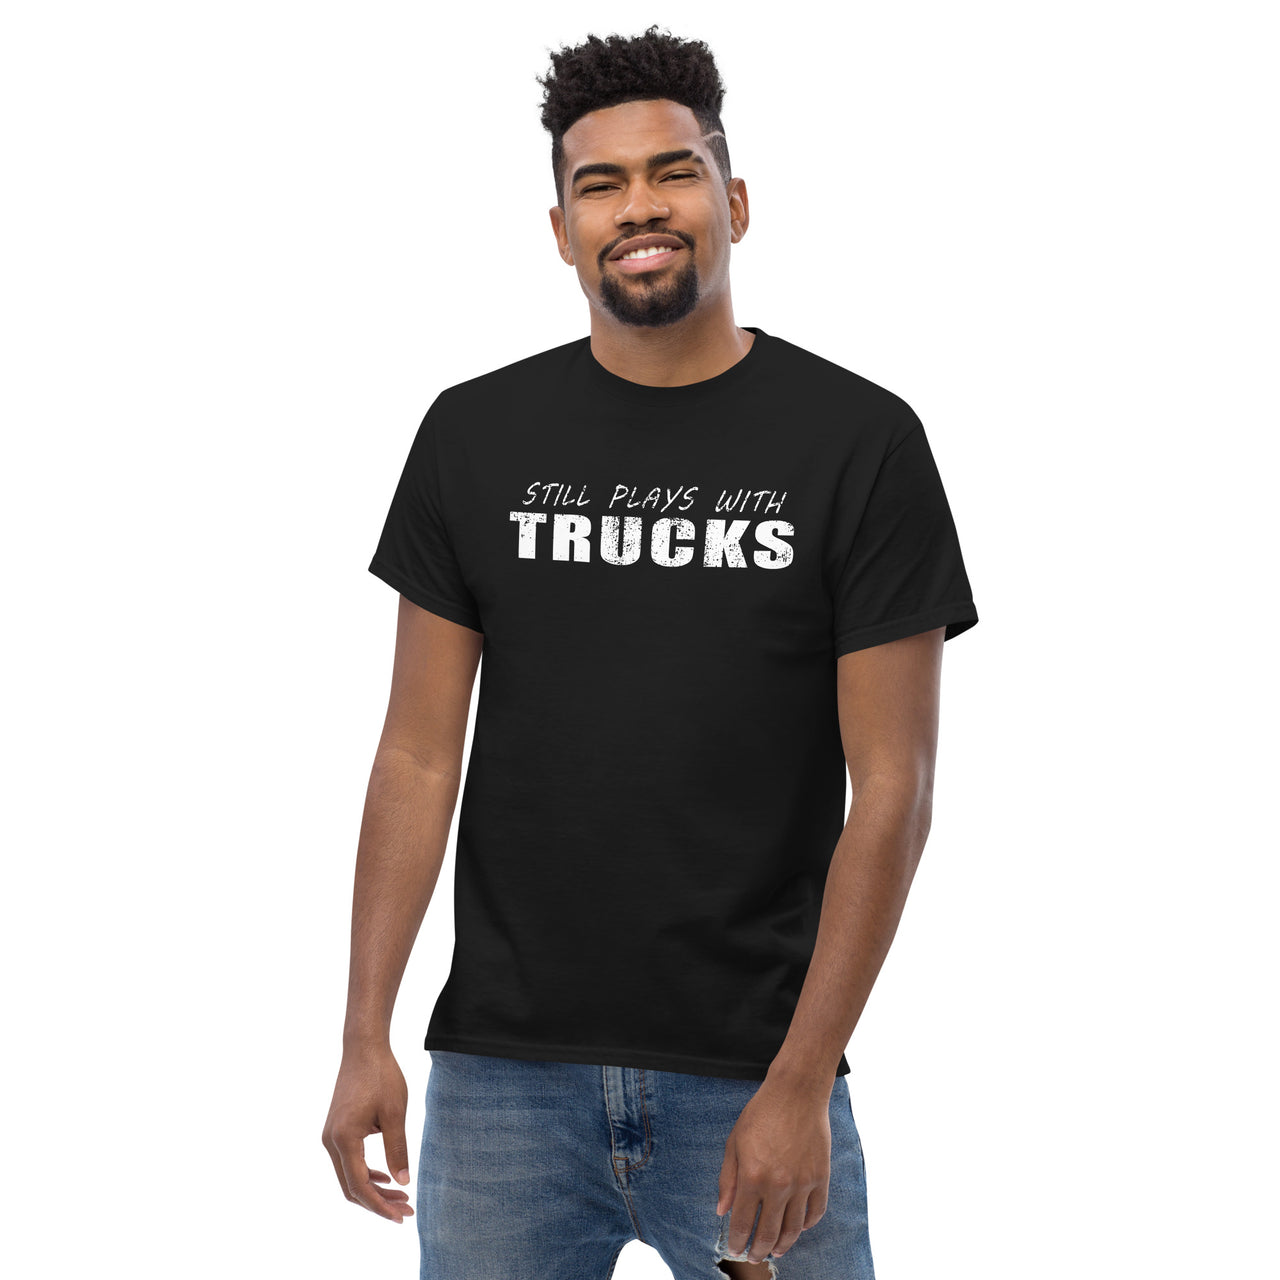 Still Plays With Trucks T-Shirt modeled in black